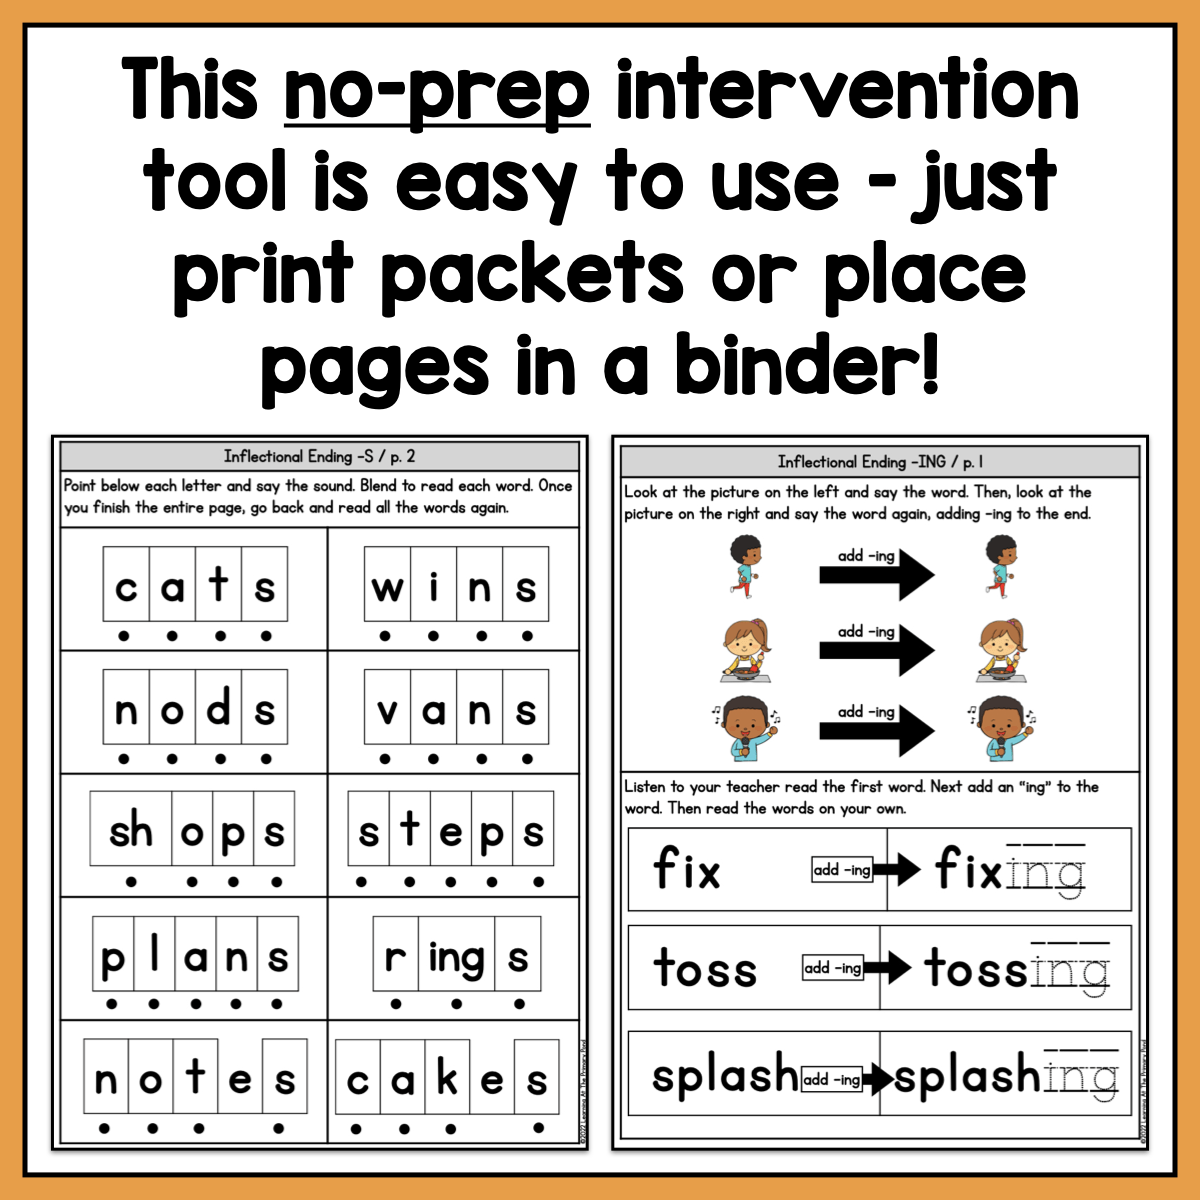 *Inflectional Endings Intervention Pack | No - Prep, Phonics - Based Reading Intervention SALE - Learning at the Primary Pond